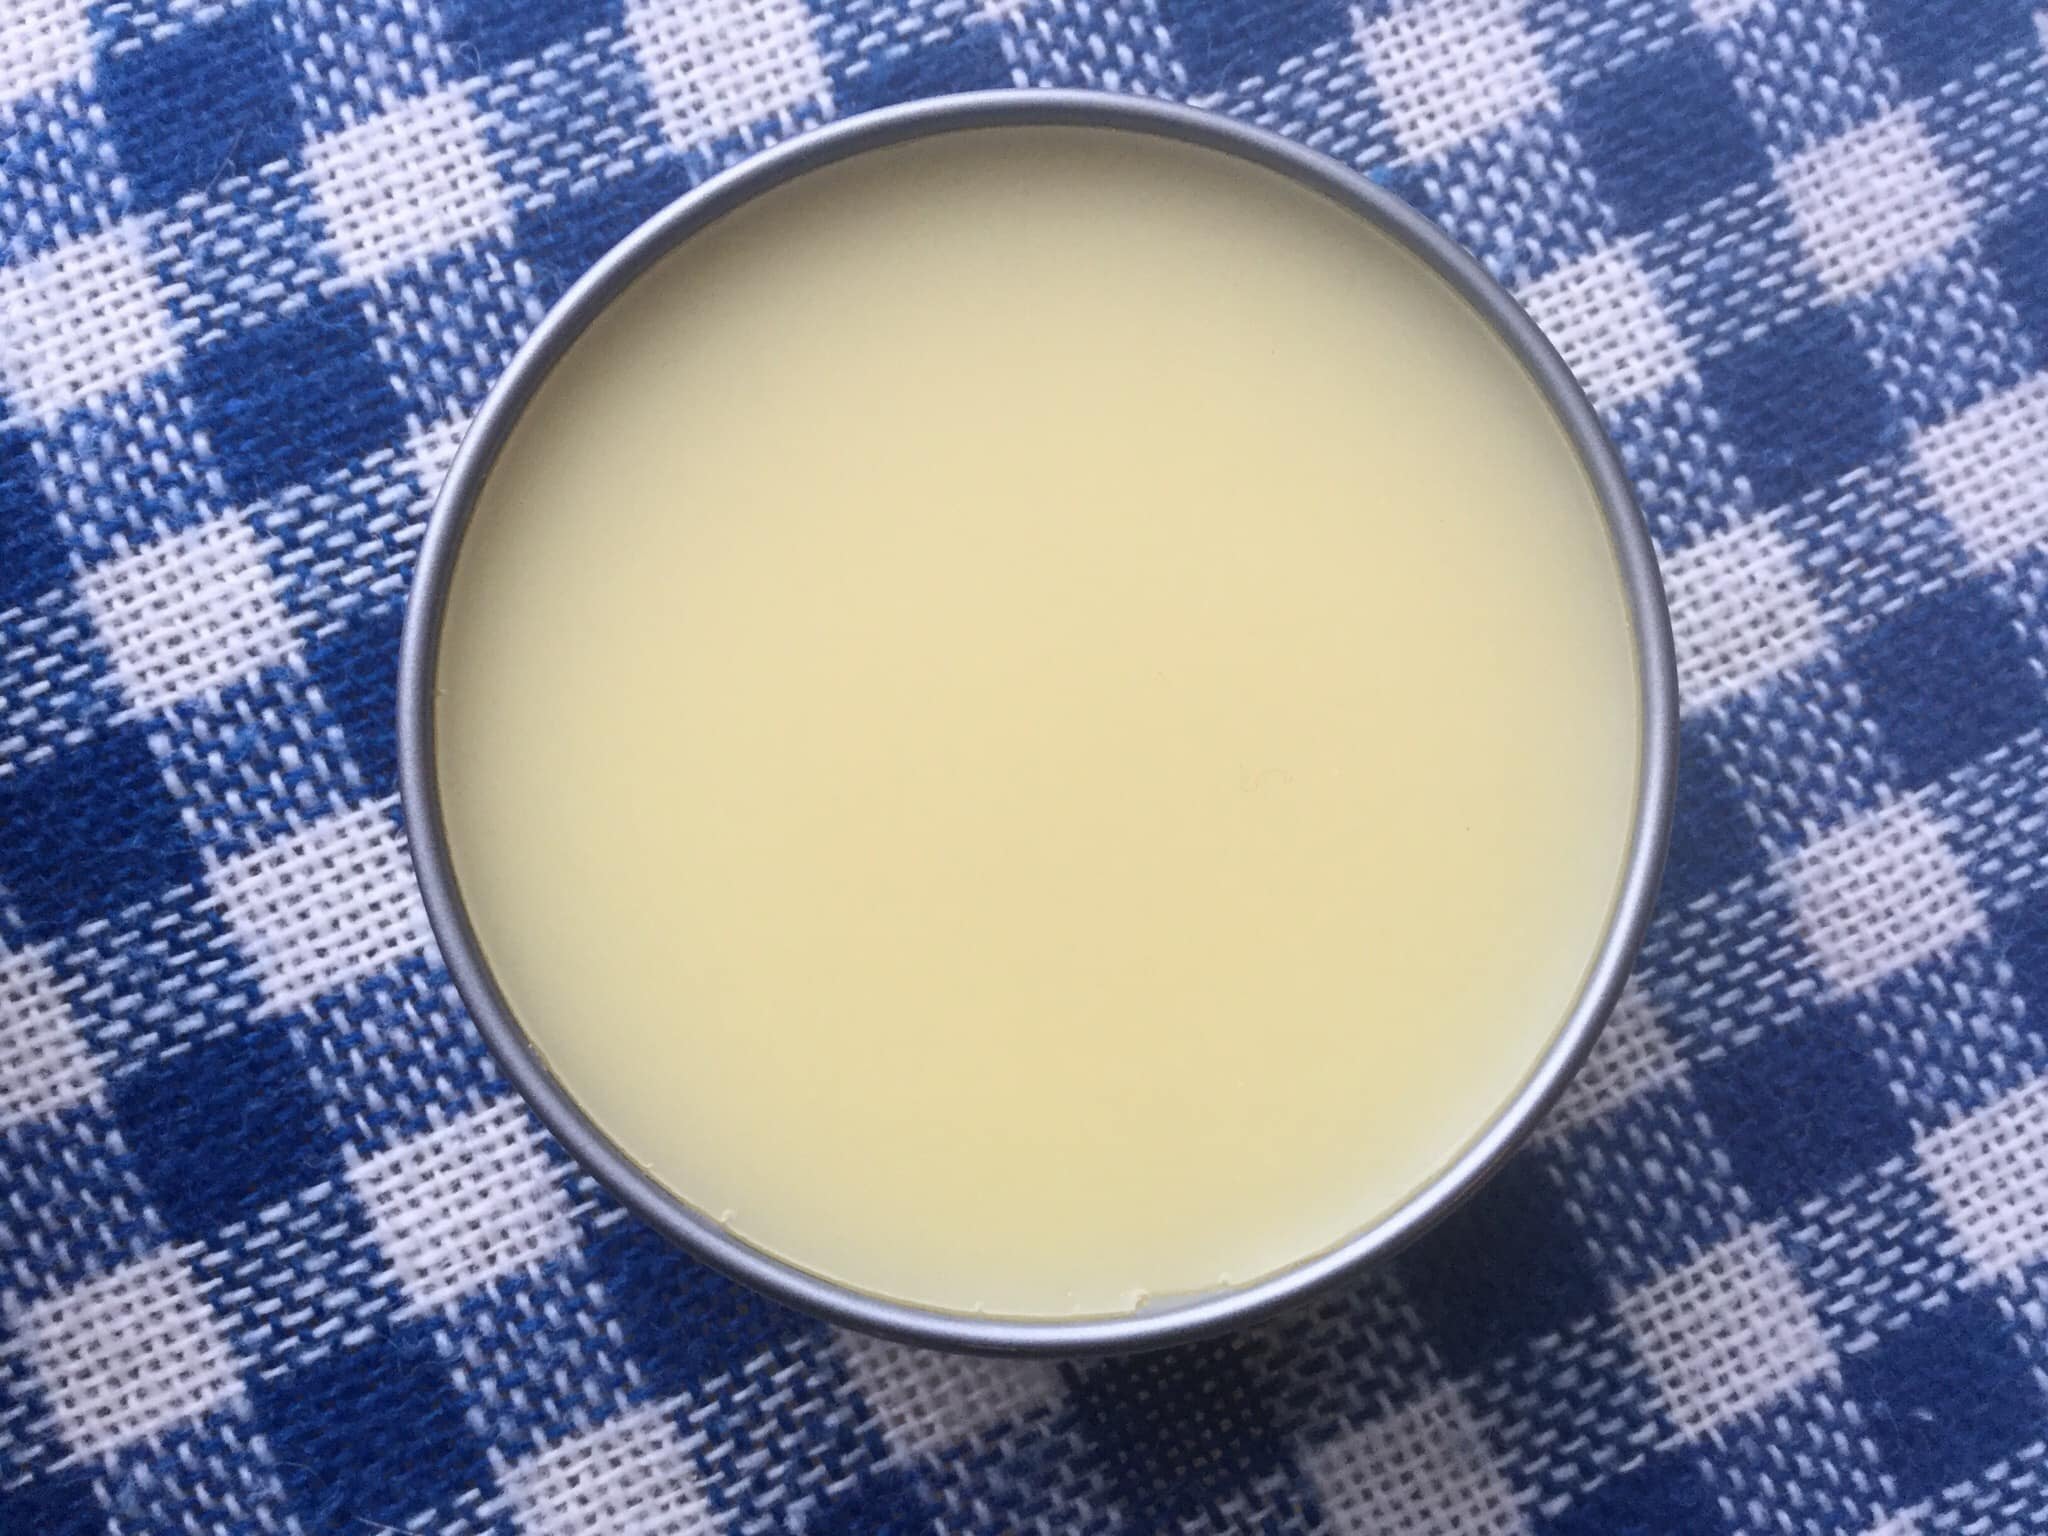 Tallow Balm - Pastured Grass-fed Tallow Balm with Lanolin, Hand & Body  Solid Lotion, for Dry Skin